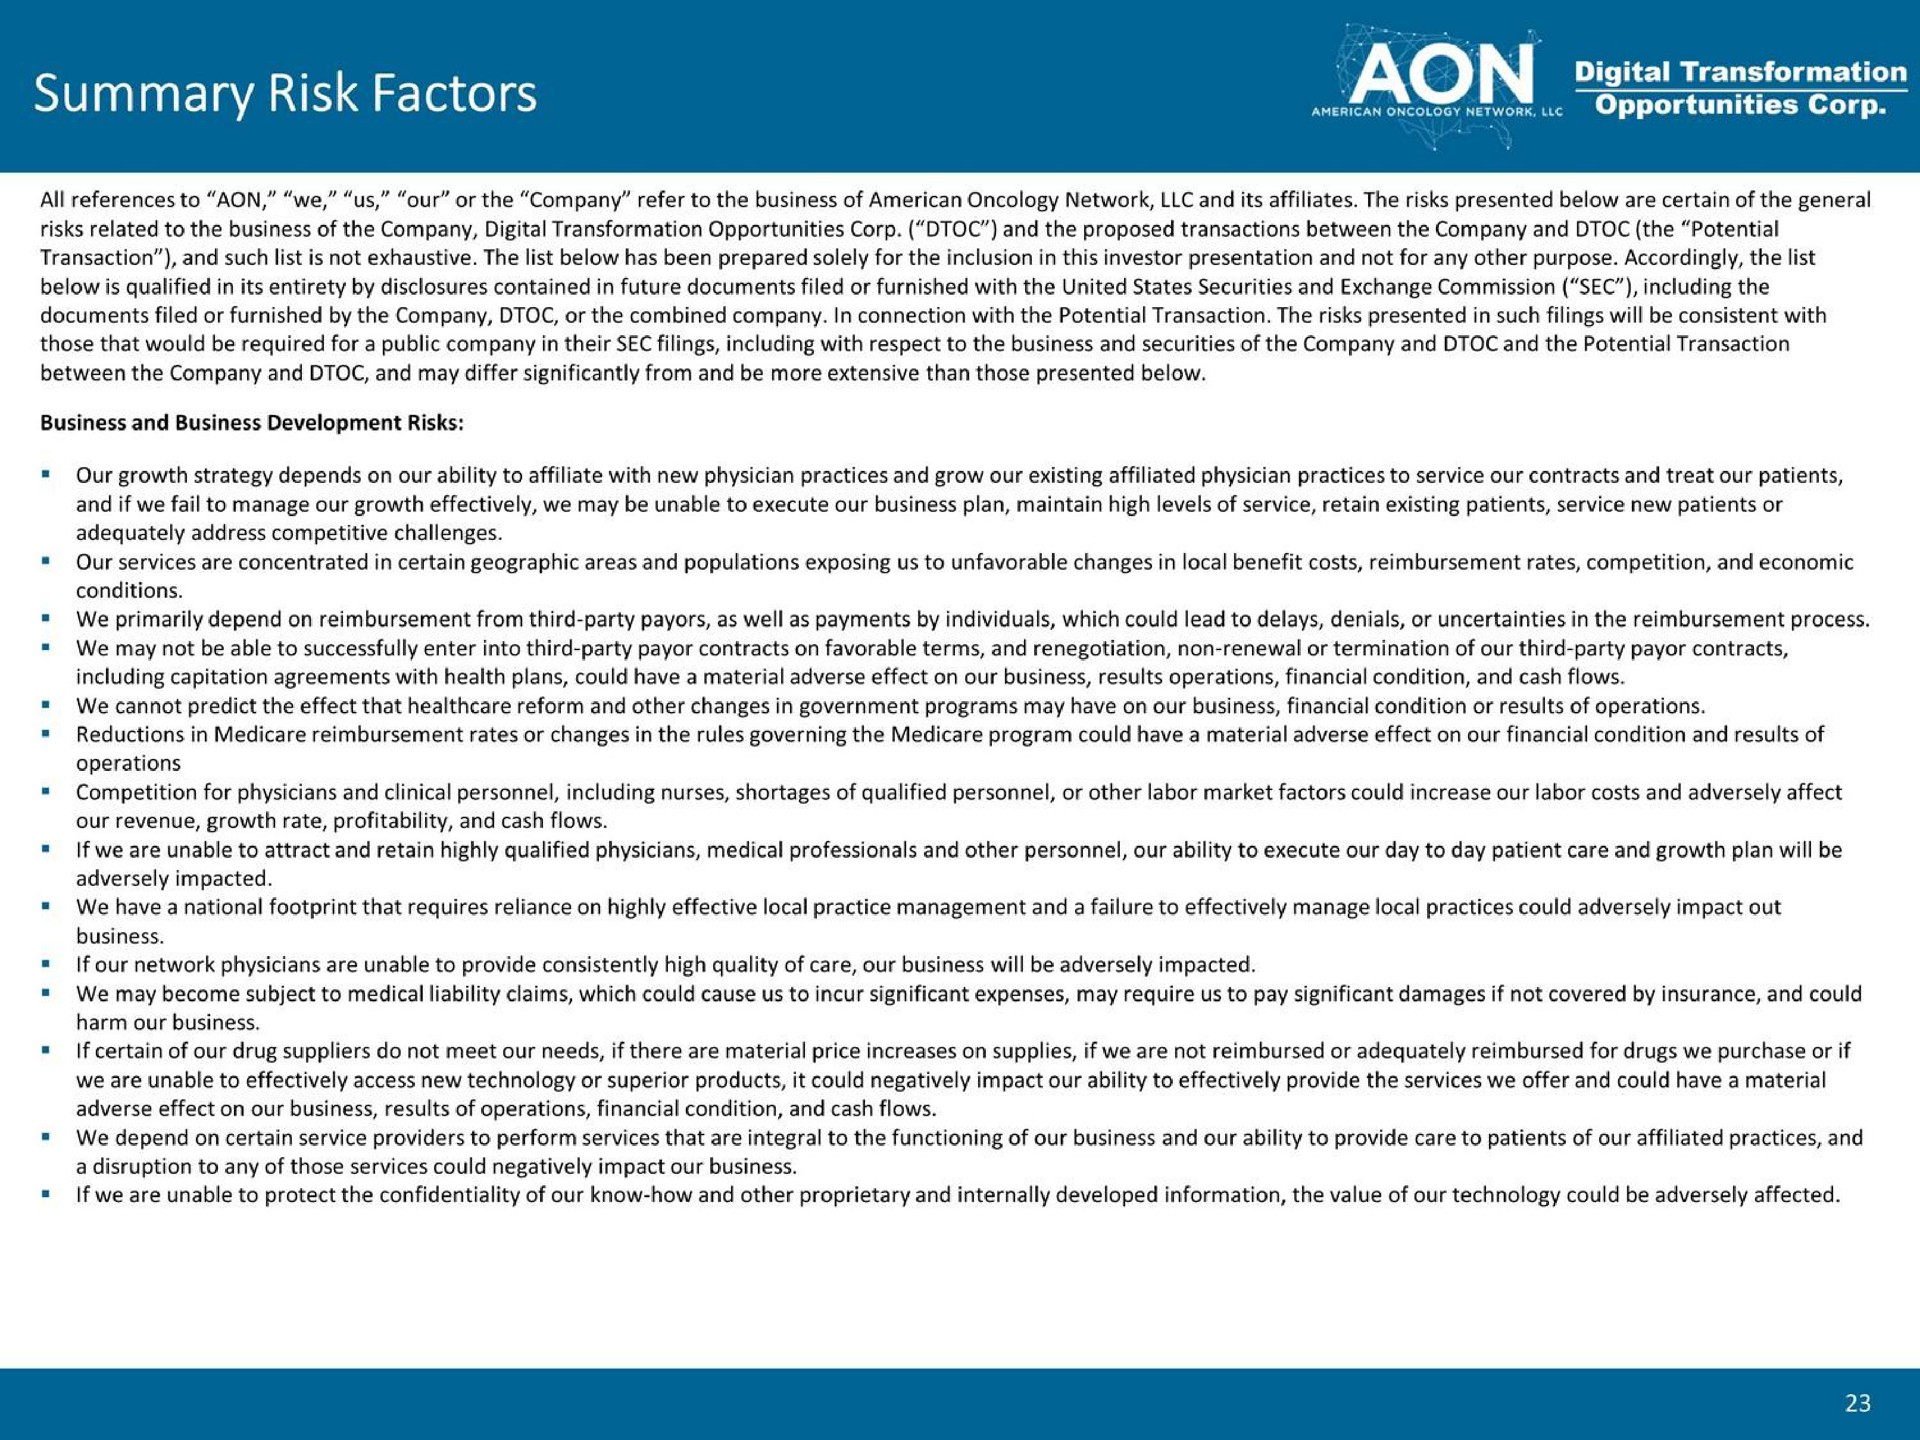 summary risk factors a | American Oncology Network